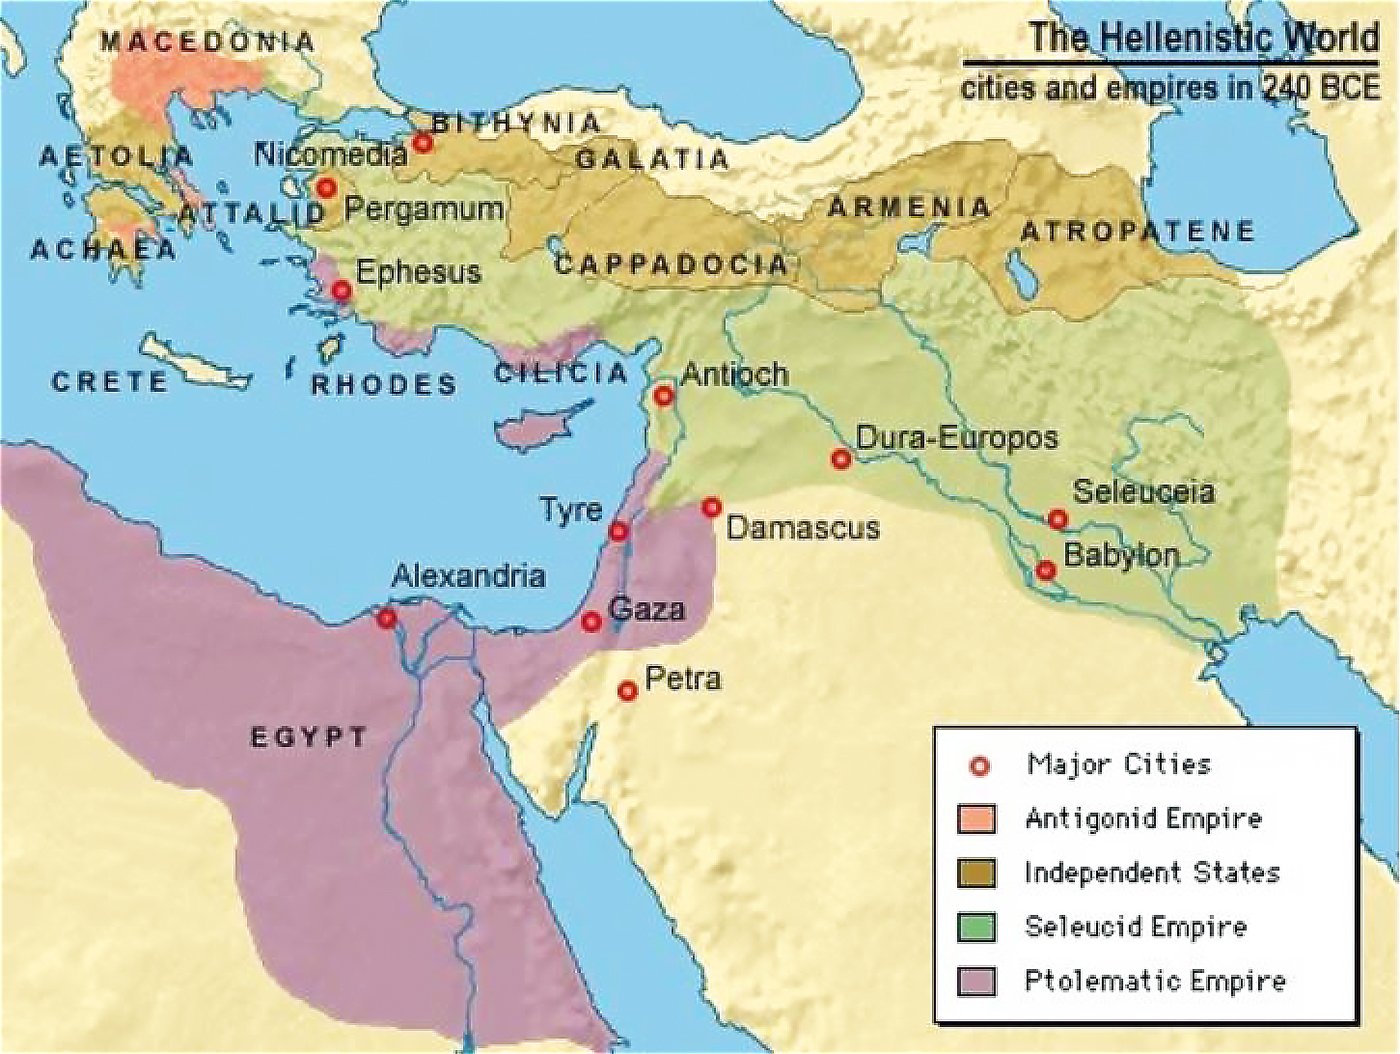  A historical map depicting the Hellenistic World circa 240 BCE. The map highlights major cities as red dots, and uses color coding to differentiate the realms of control: the Antigonid Empire in orange, independent states in light brown, the Seleucid Empire in green, and the Ptolemaic Empire in pink. Notable cities such as Alexandria, Antioch, and Babylon are marked, alongside geographic features like the Mediterranean Sea, outlining the extent of Hellenistic influence in the ancient world.